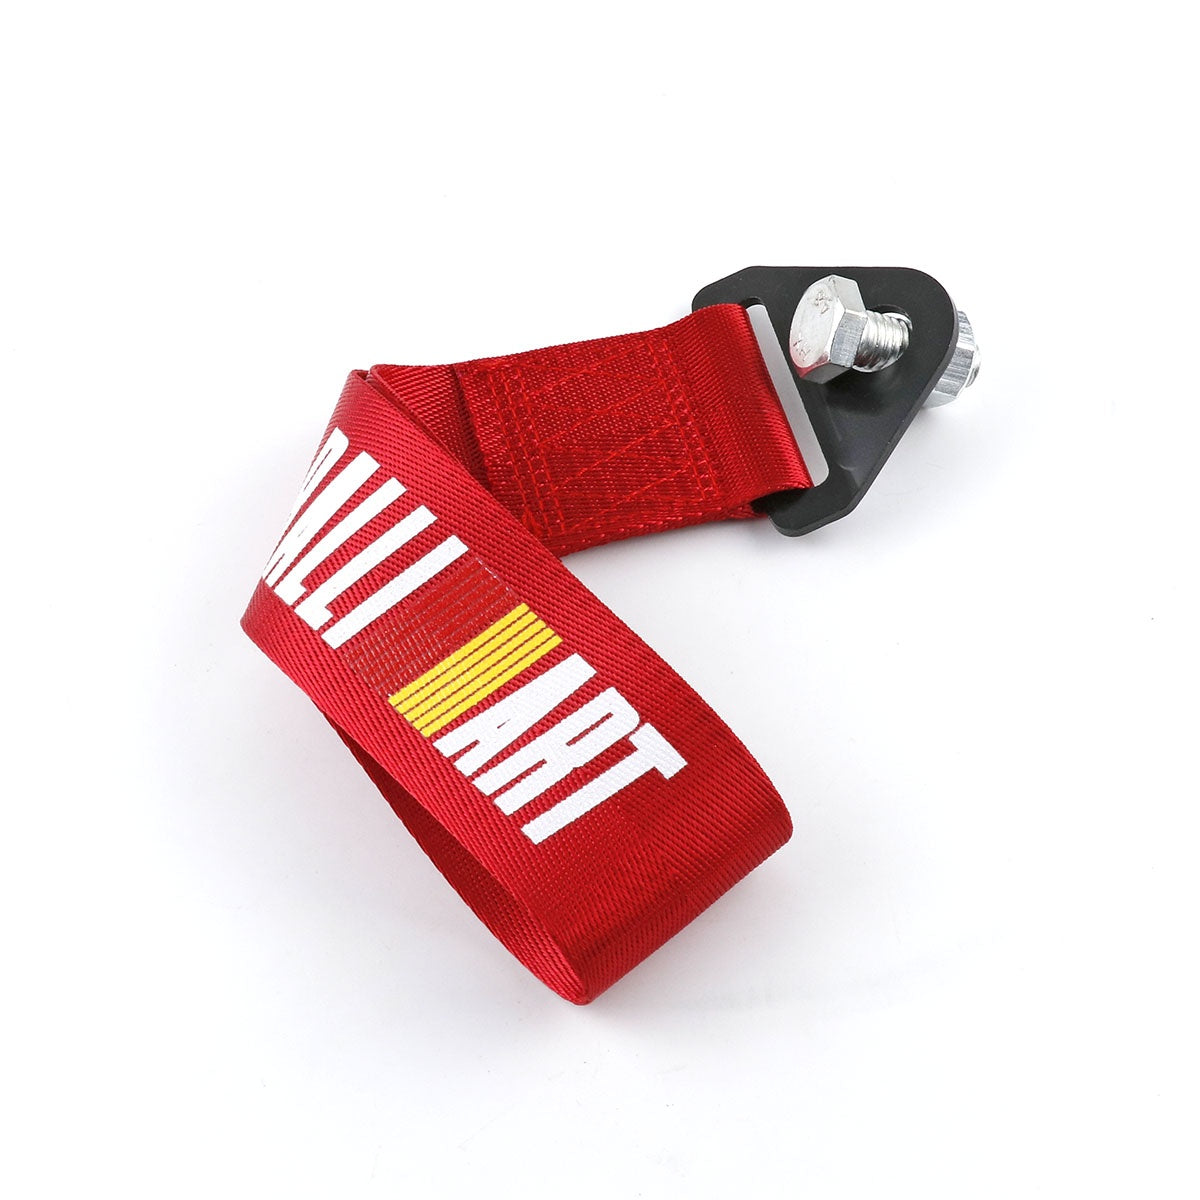 Ralliart JDM tow strap in red.